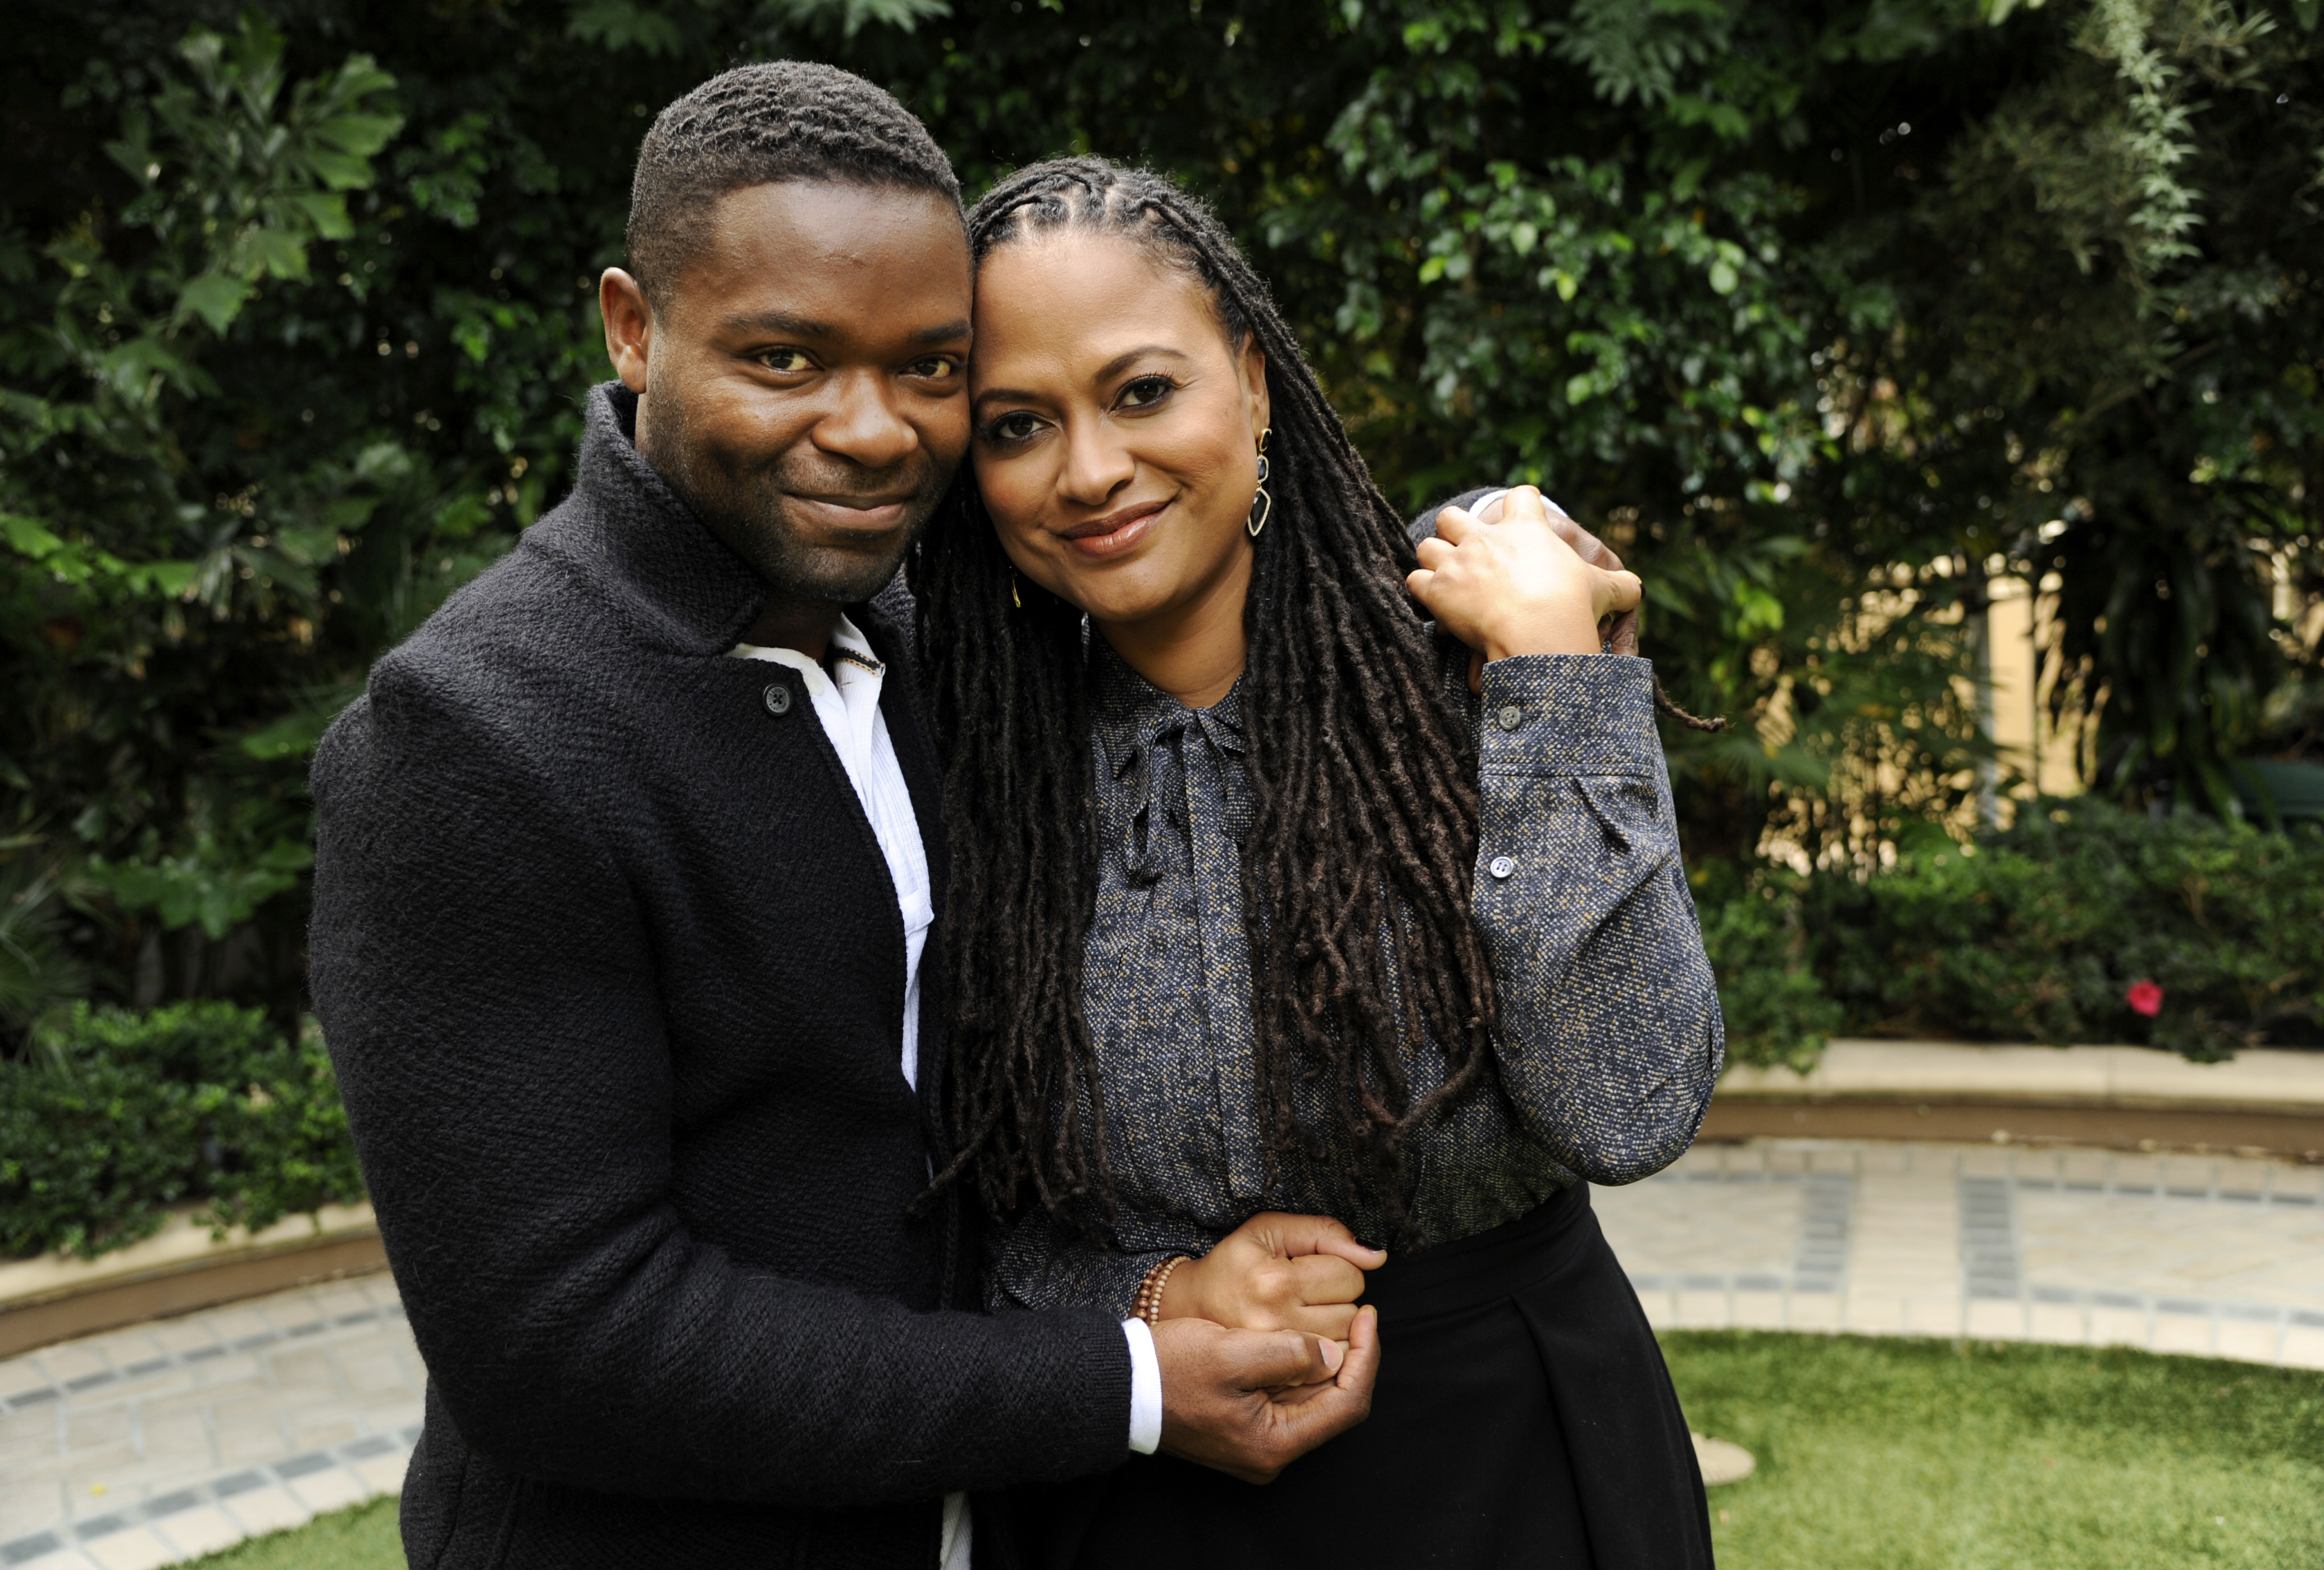 Ava DuVernay, right, director of the film "Selma," and cast member David Oyelowo pose together at the Four Seasons Hotel on Wednesday, Nov. 12, 2014, in Beverly Hills, Calif. (Photo by Chris Pizzello/Invision/AP) (Chris Pizzello&mdash;Chris Pizzello/Invision/AP)